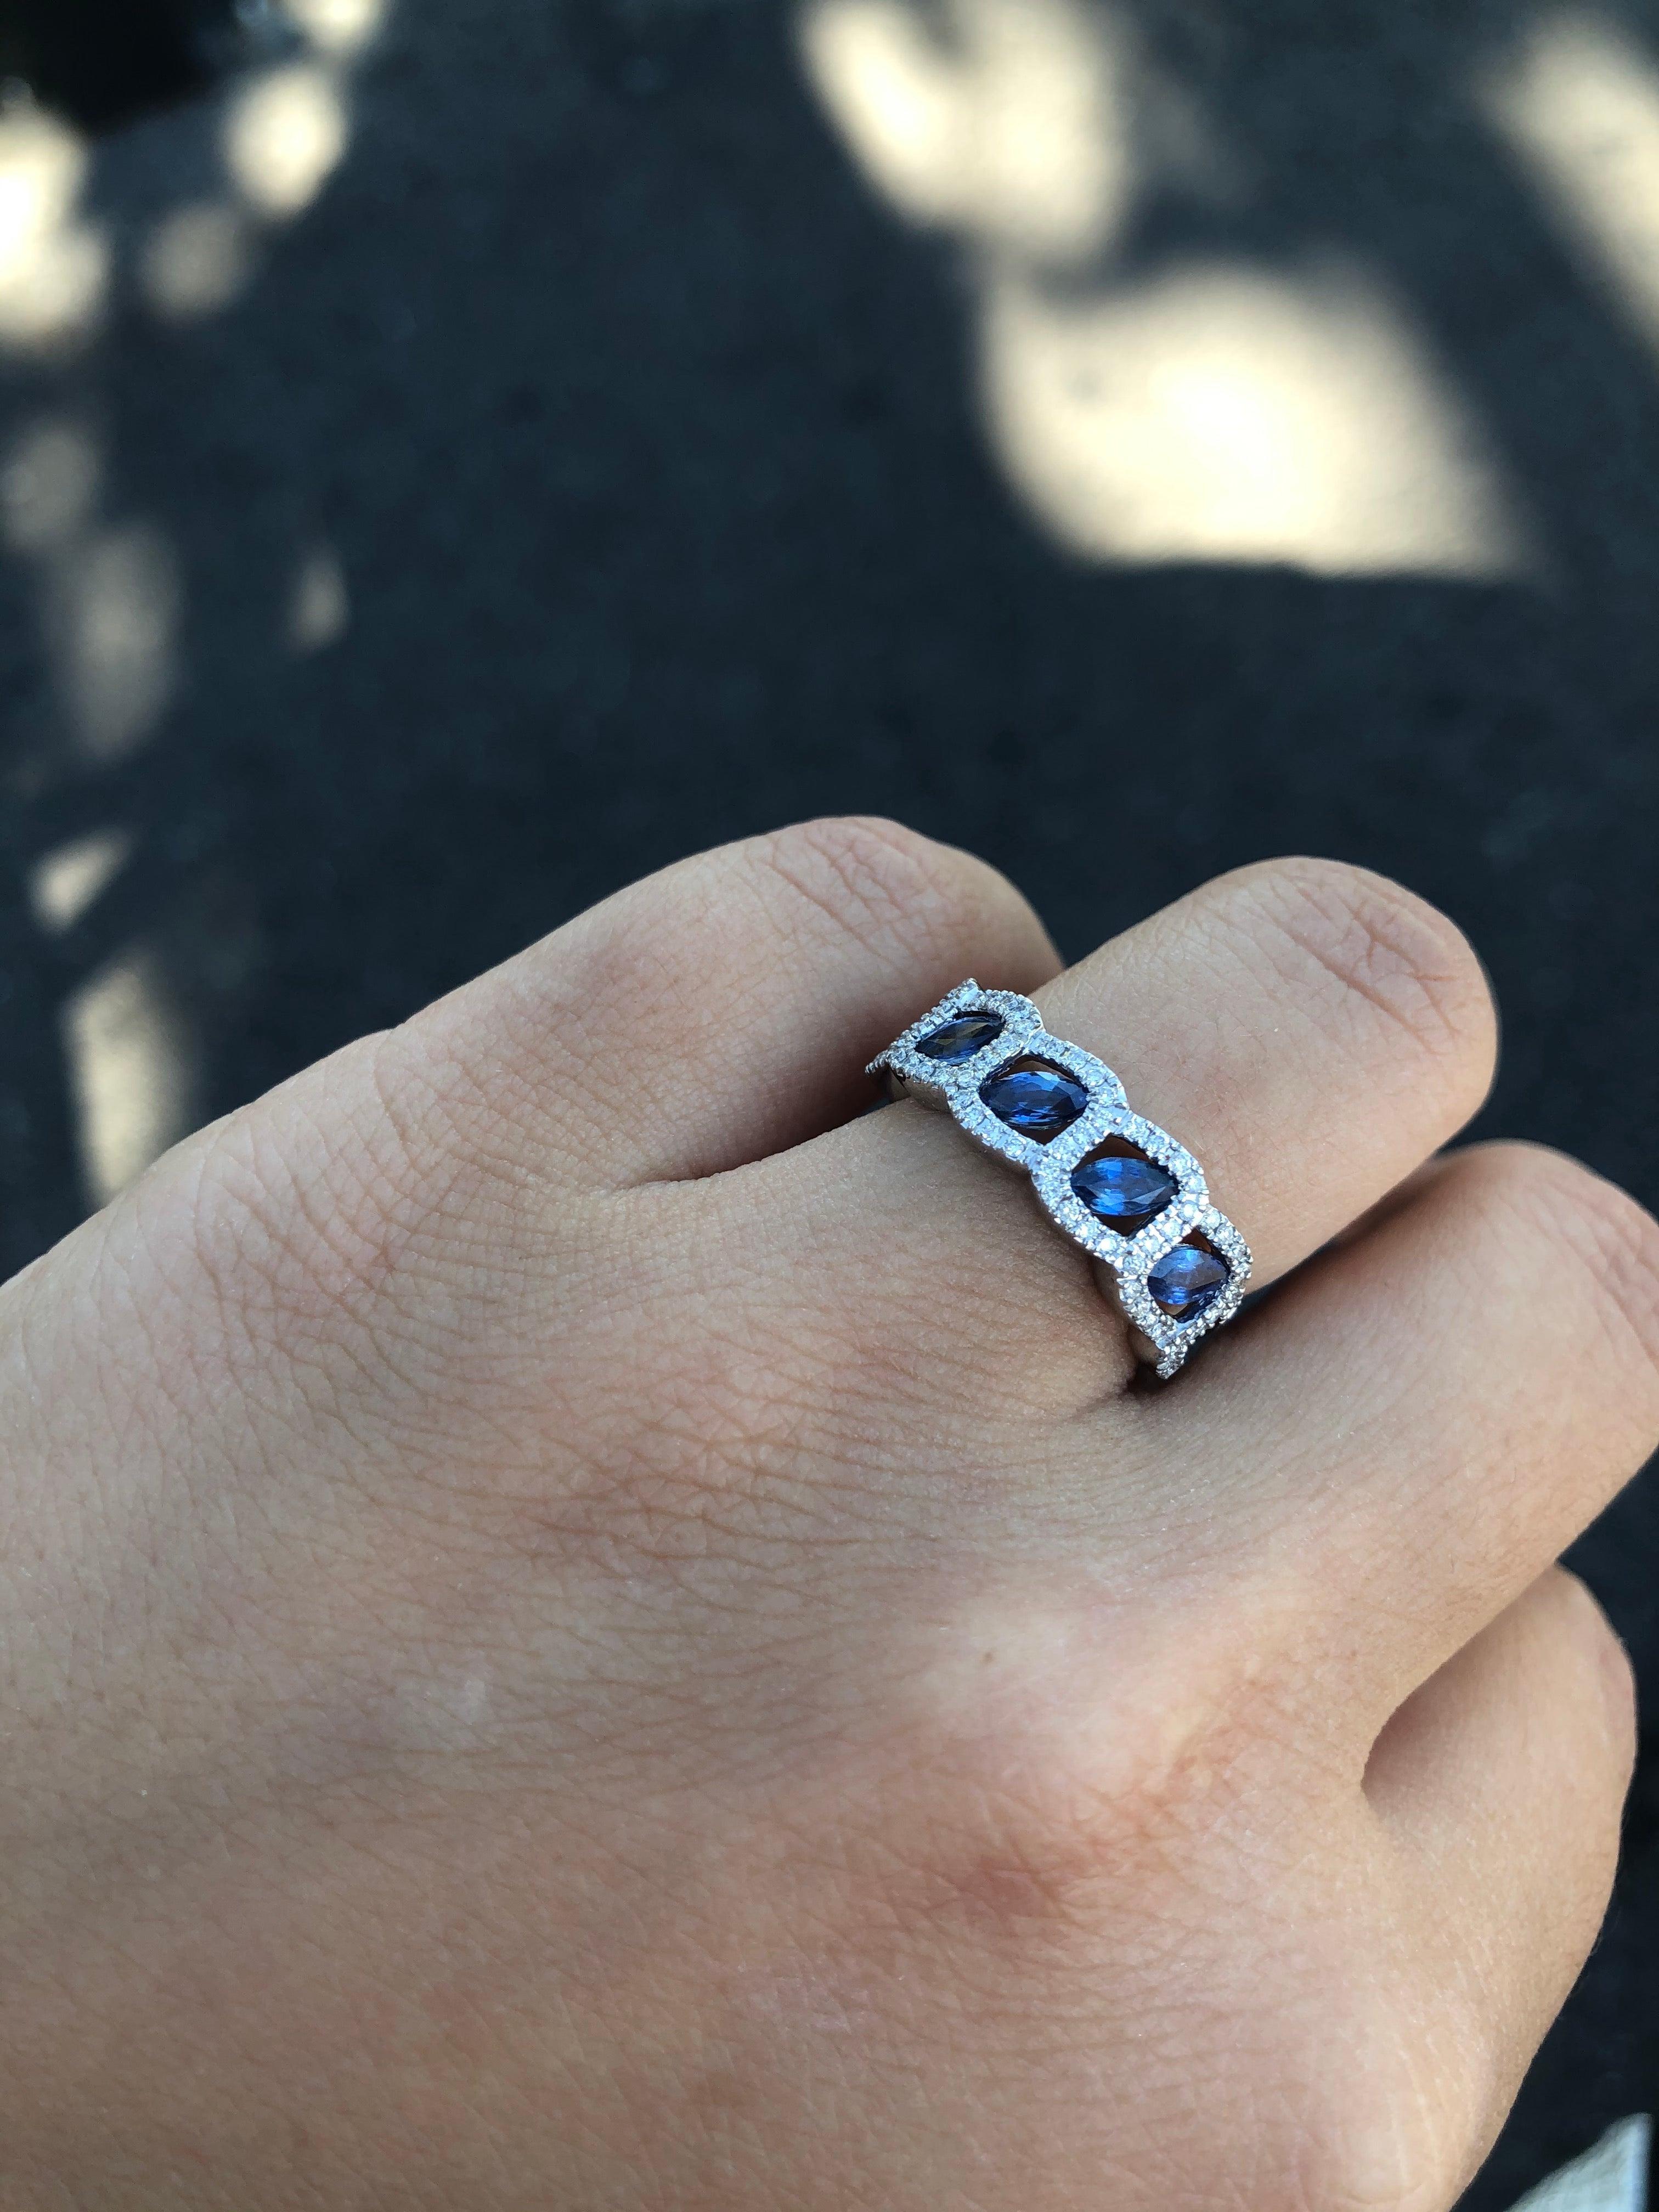 For Sale:  Breathtaking Classic Blue Sapphire Diamond White Gold Wedding Band for Her 3